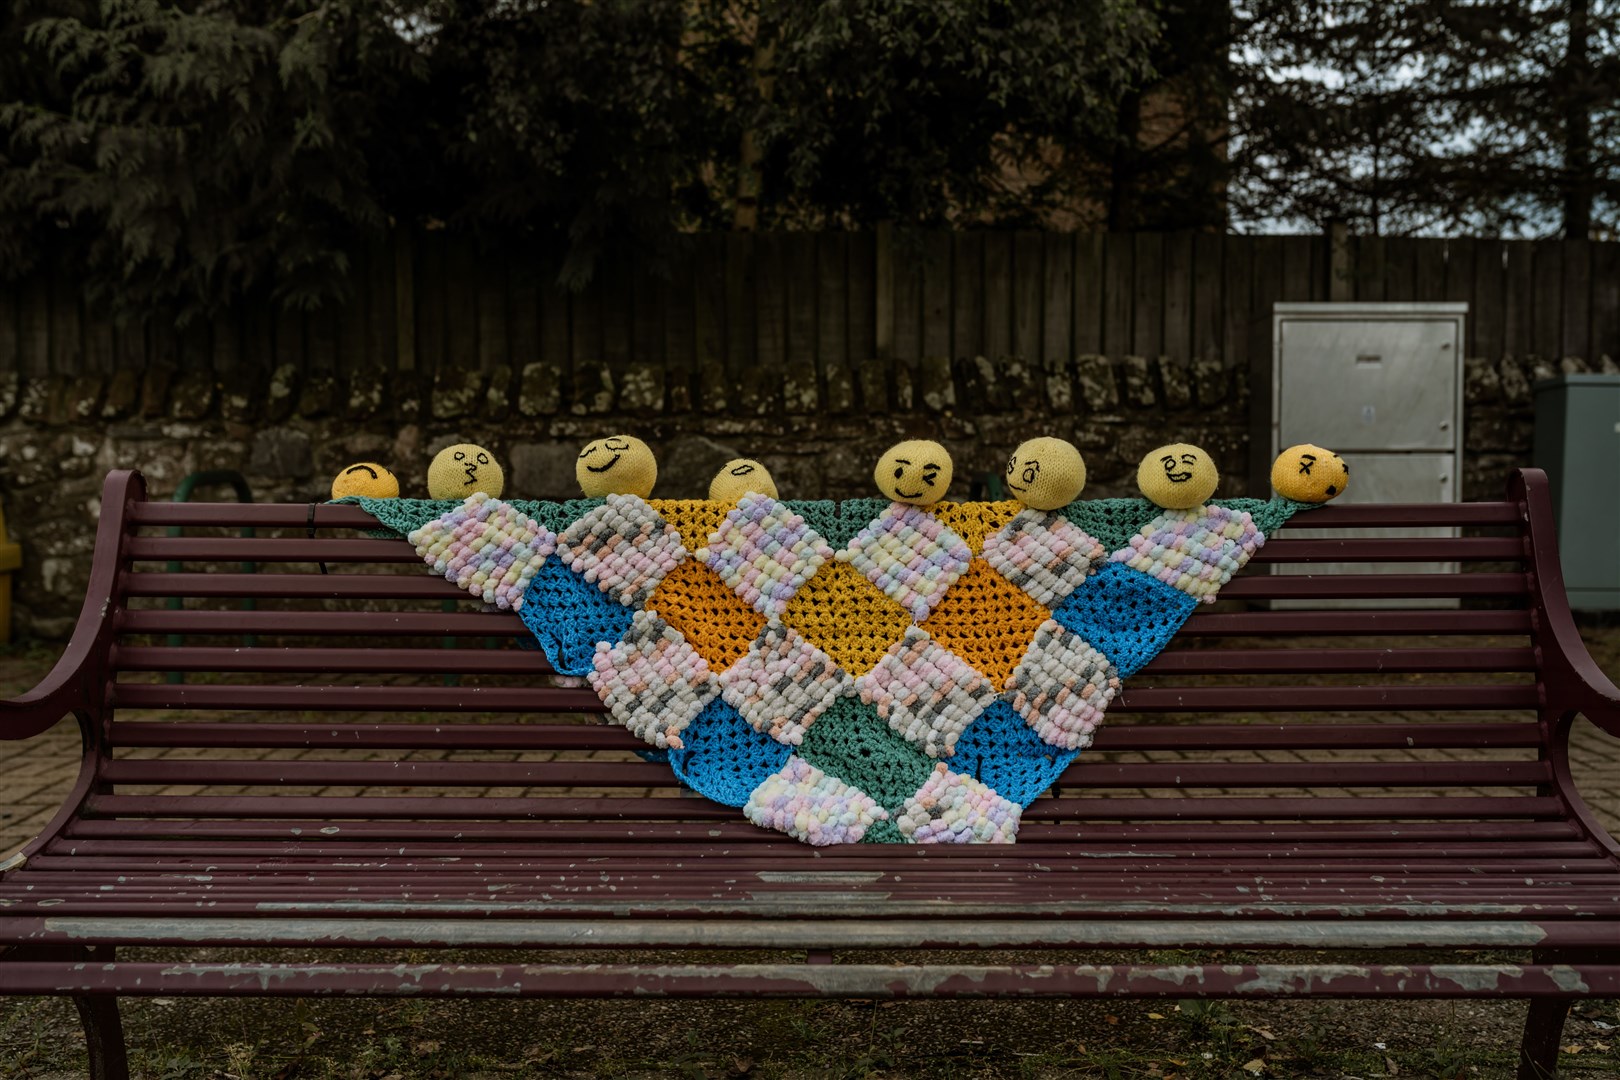 Even a village bench has been decorated.